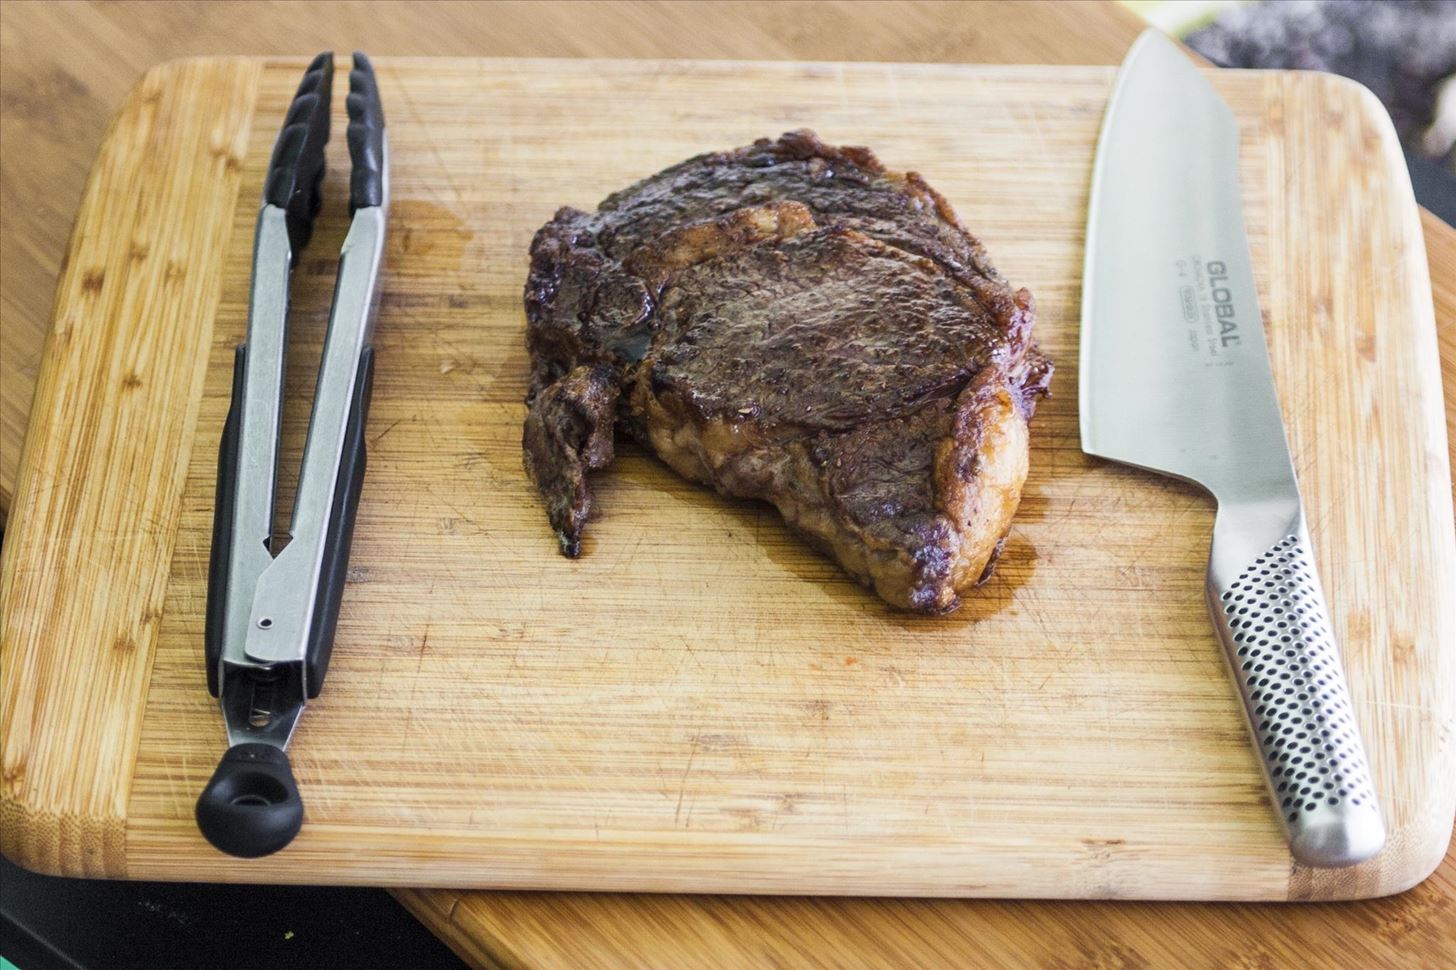 How to Cut a Cooked Steak the Right Way